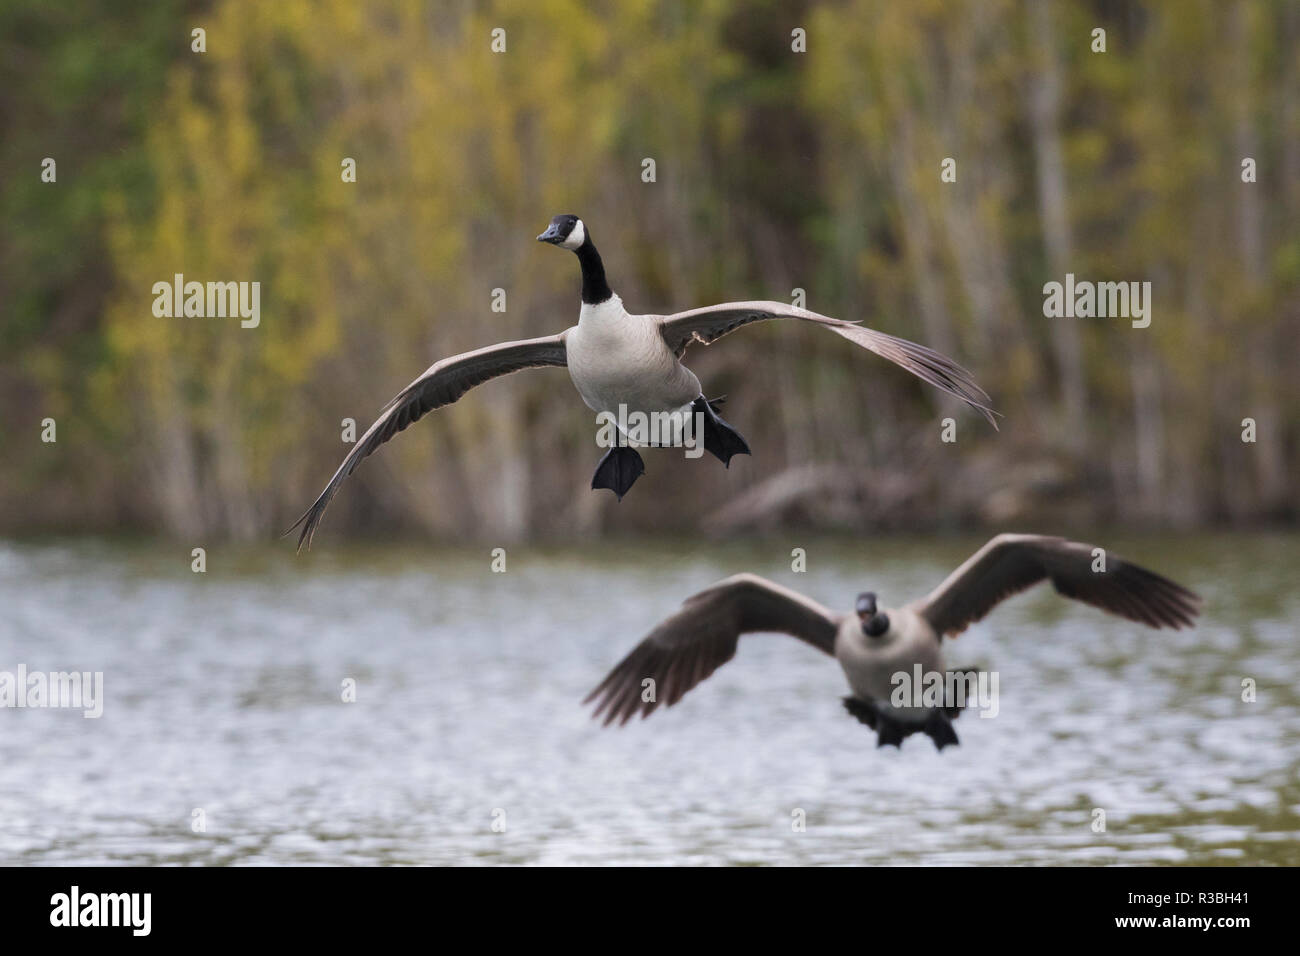 Greater Canada geese alighting Stock Photo